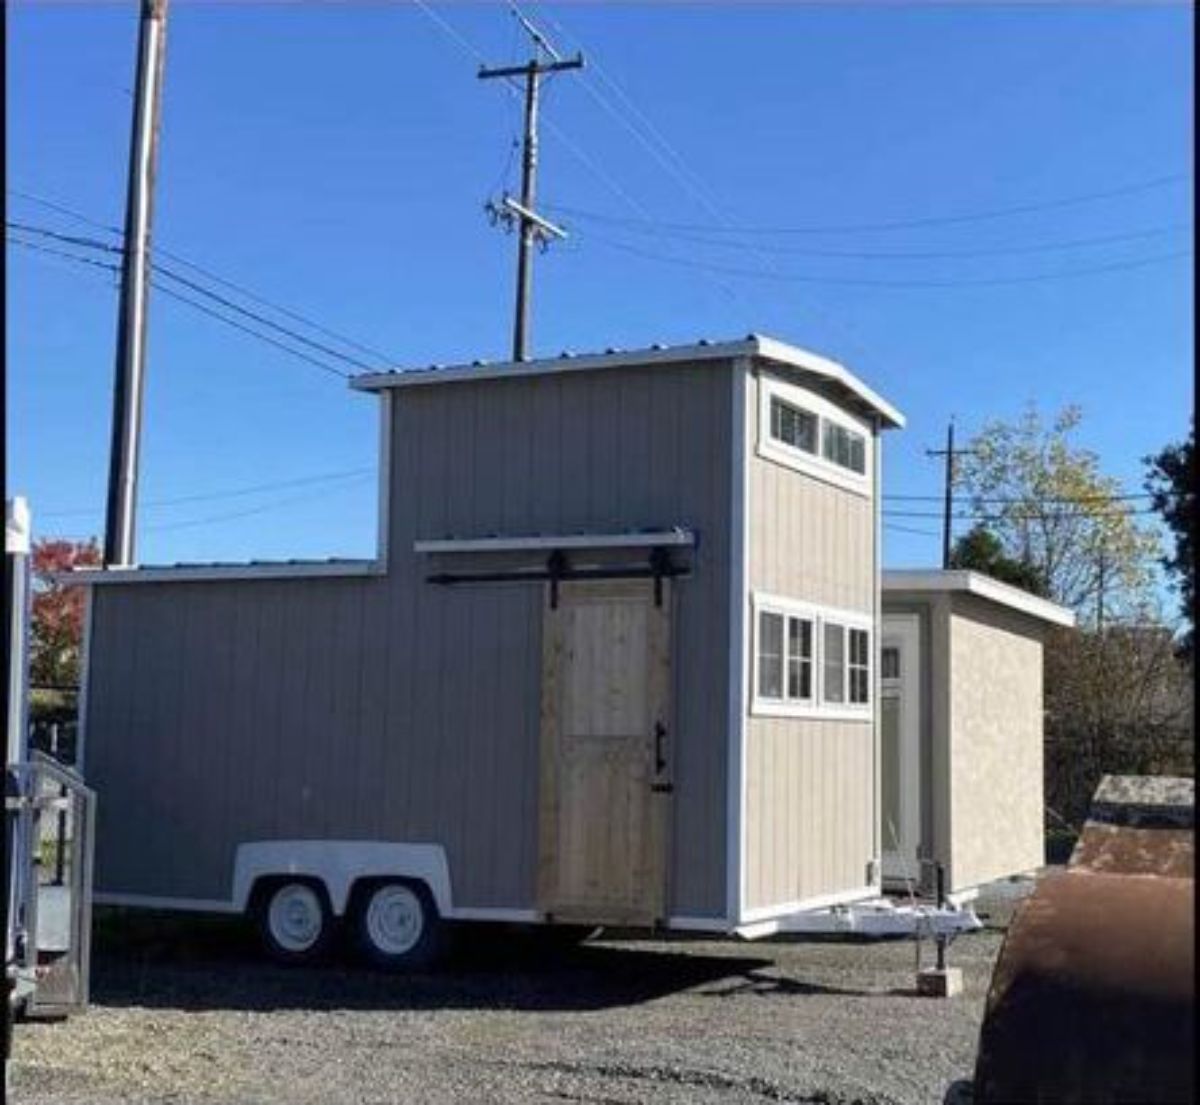 17’ Tiny Home With Sleeping Loft Up For Grabs from outside